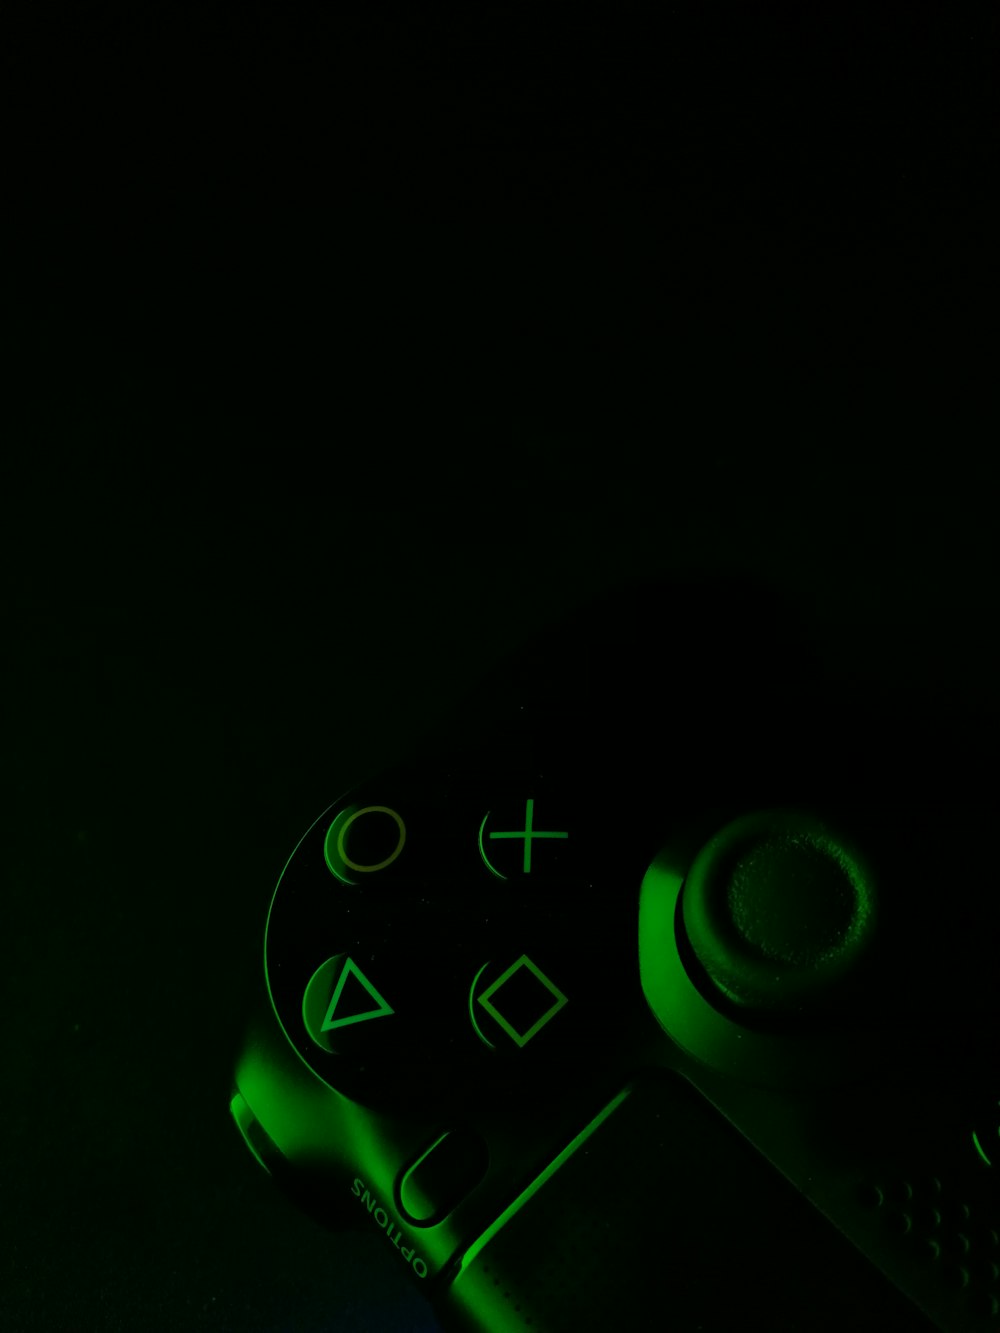 green and black game controller in dimmed light